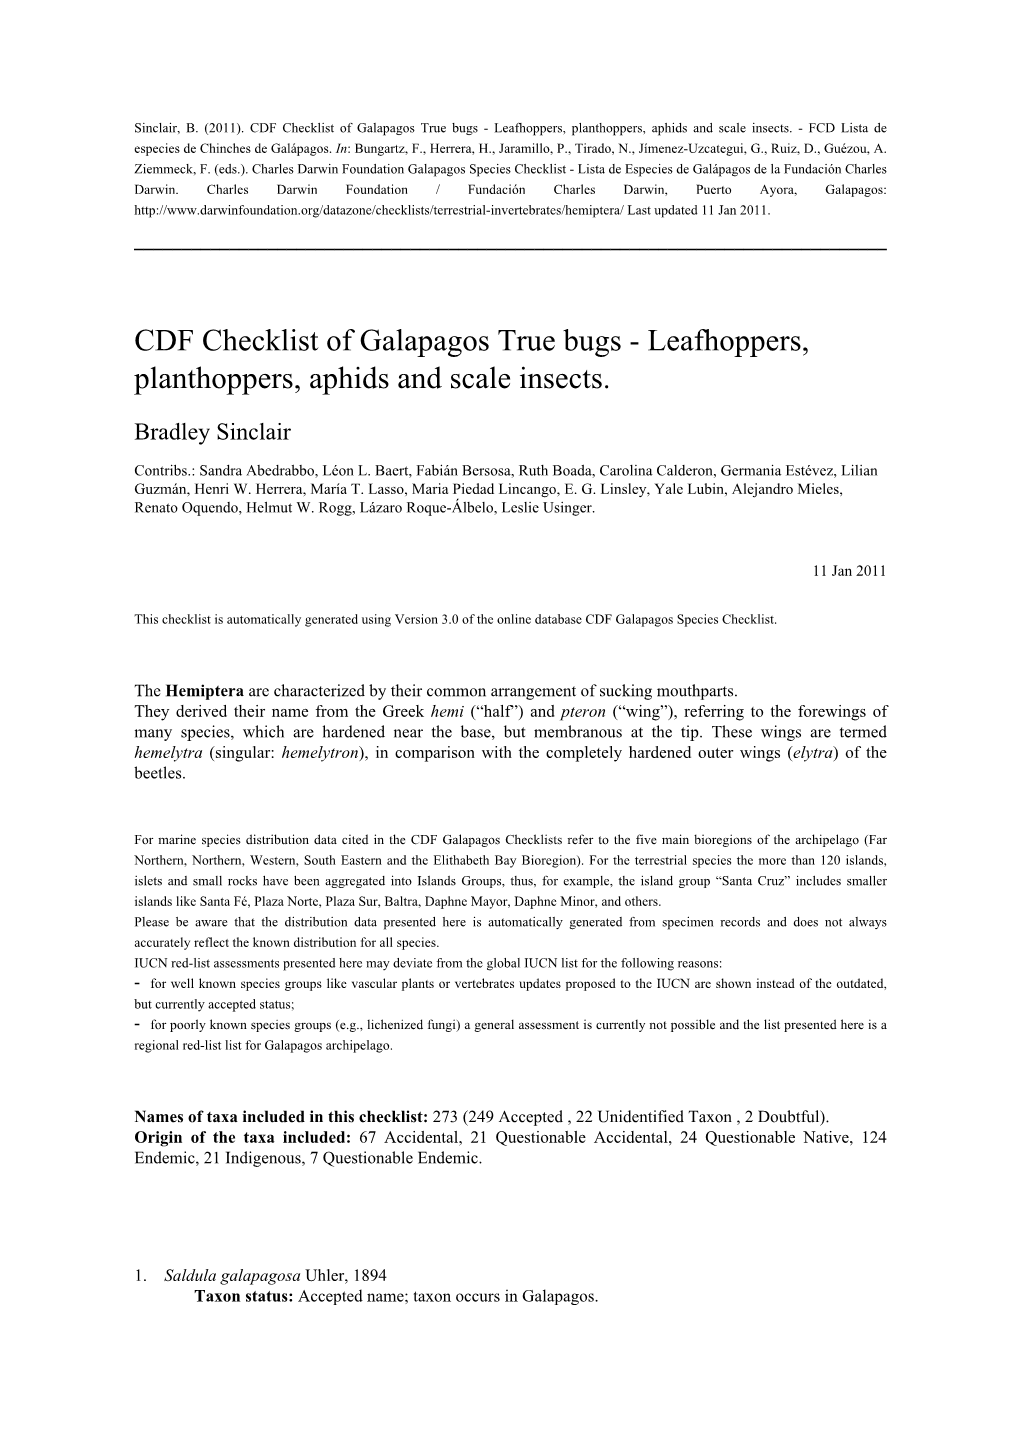 CDF Checklist of Galapagos True Bugs - Leafhoppers, Planthoppers, Aphids and Scale Insects